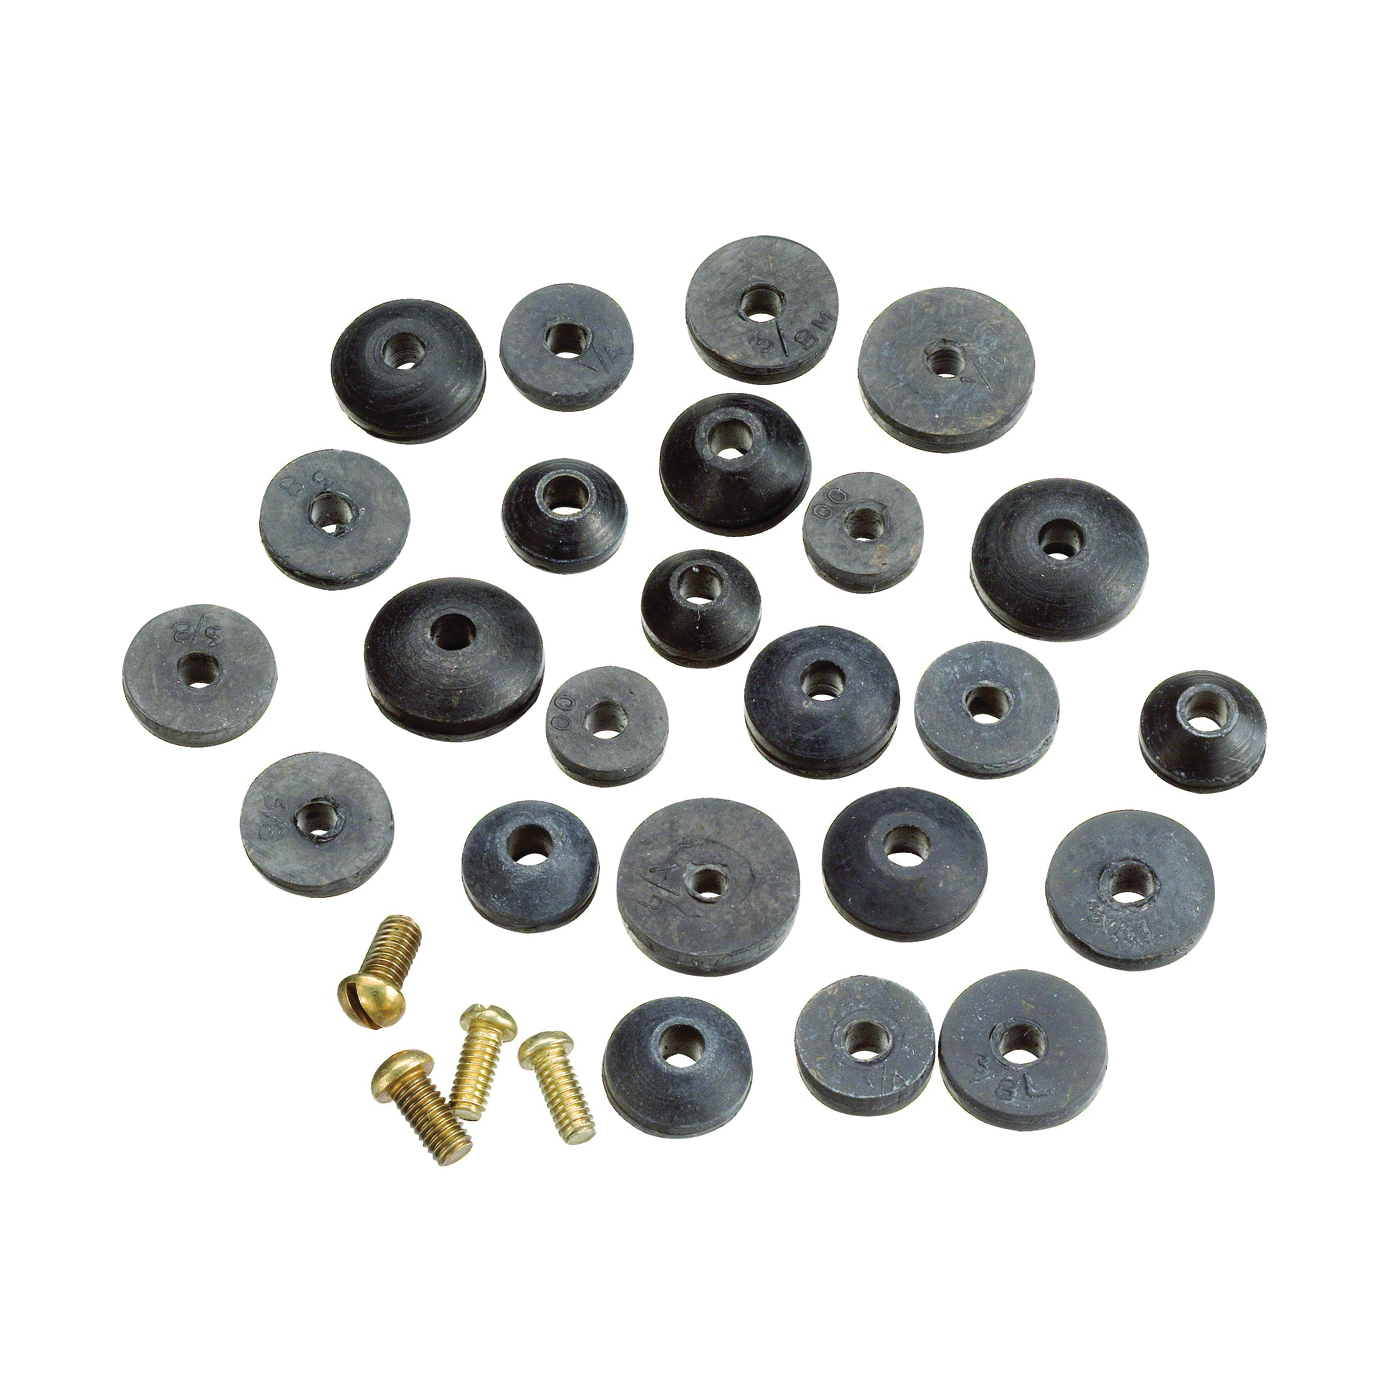 PP805-21 Faucet Washer Assortment, Brass/Rubber, For: Sink and Faucets